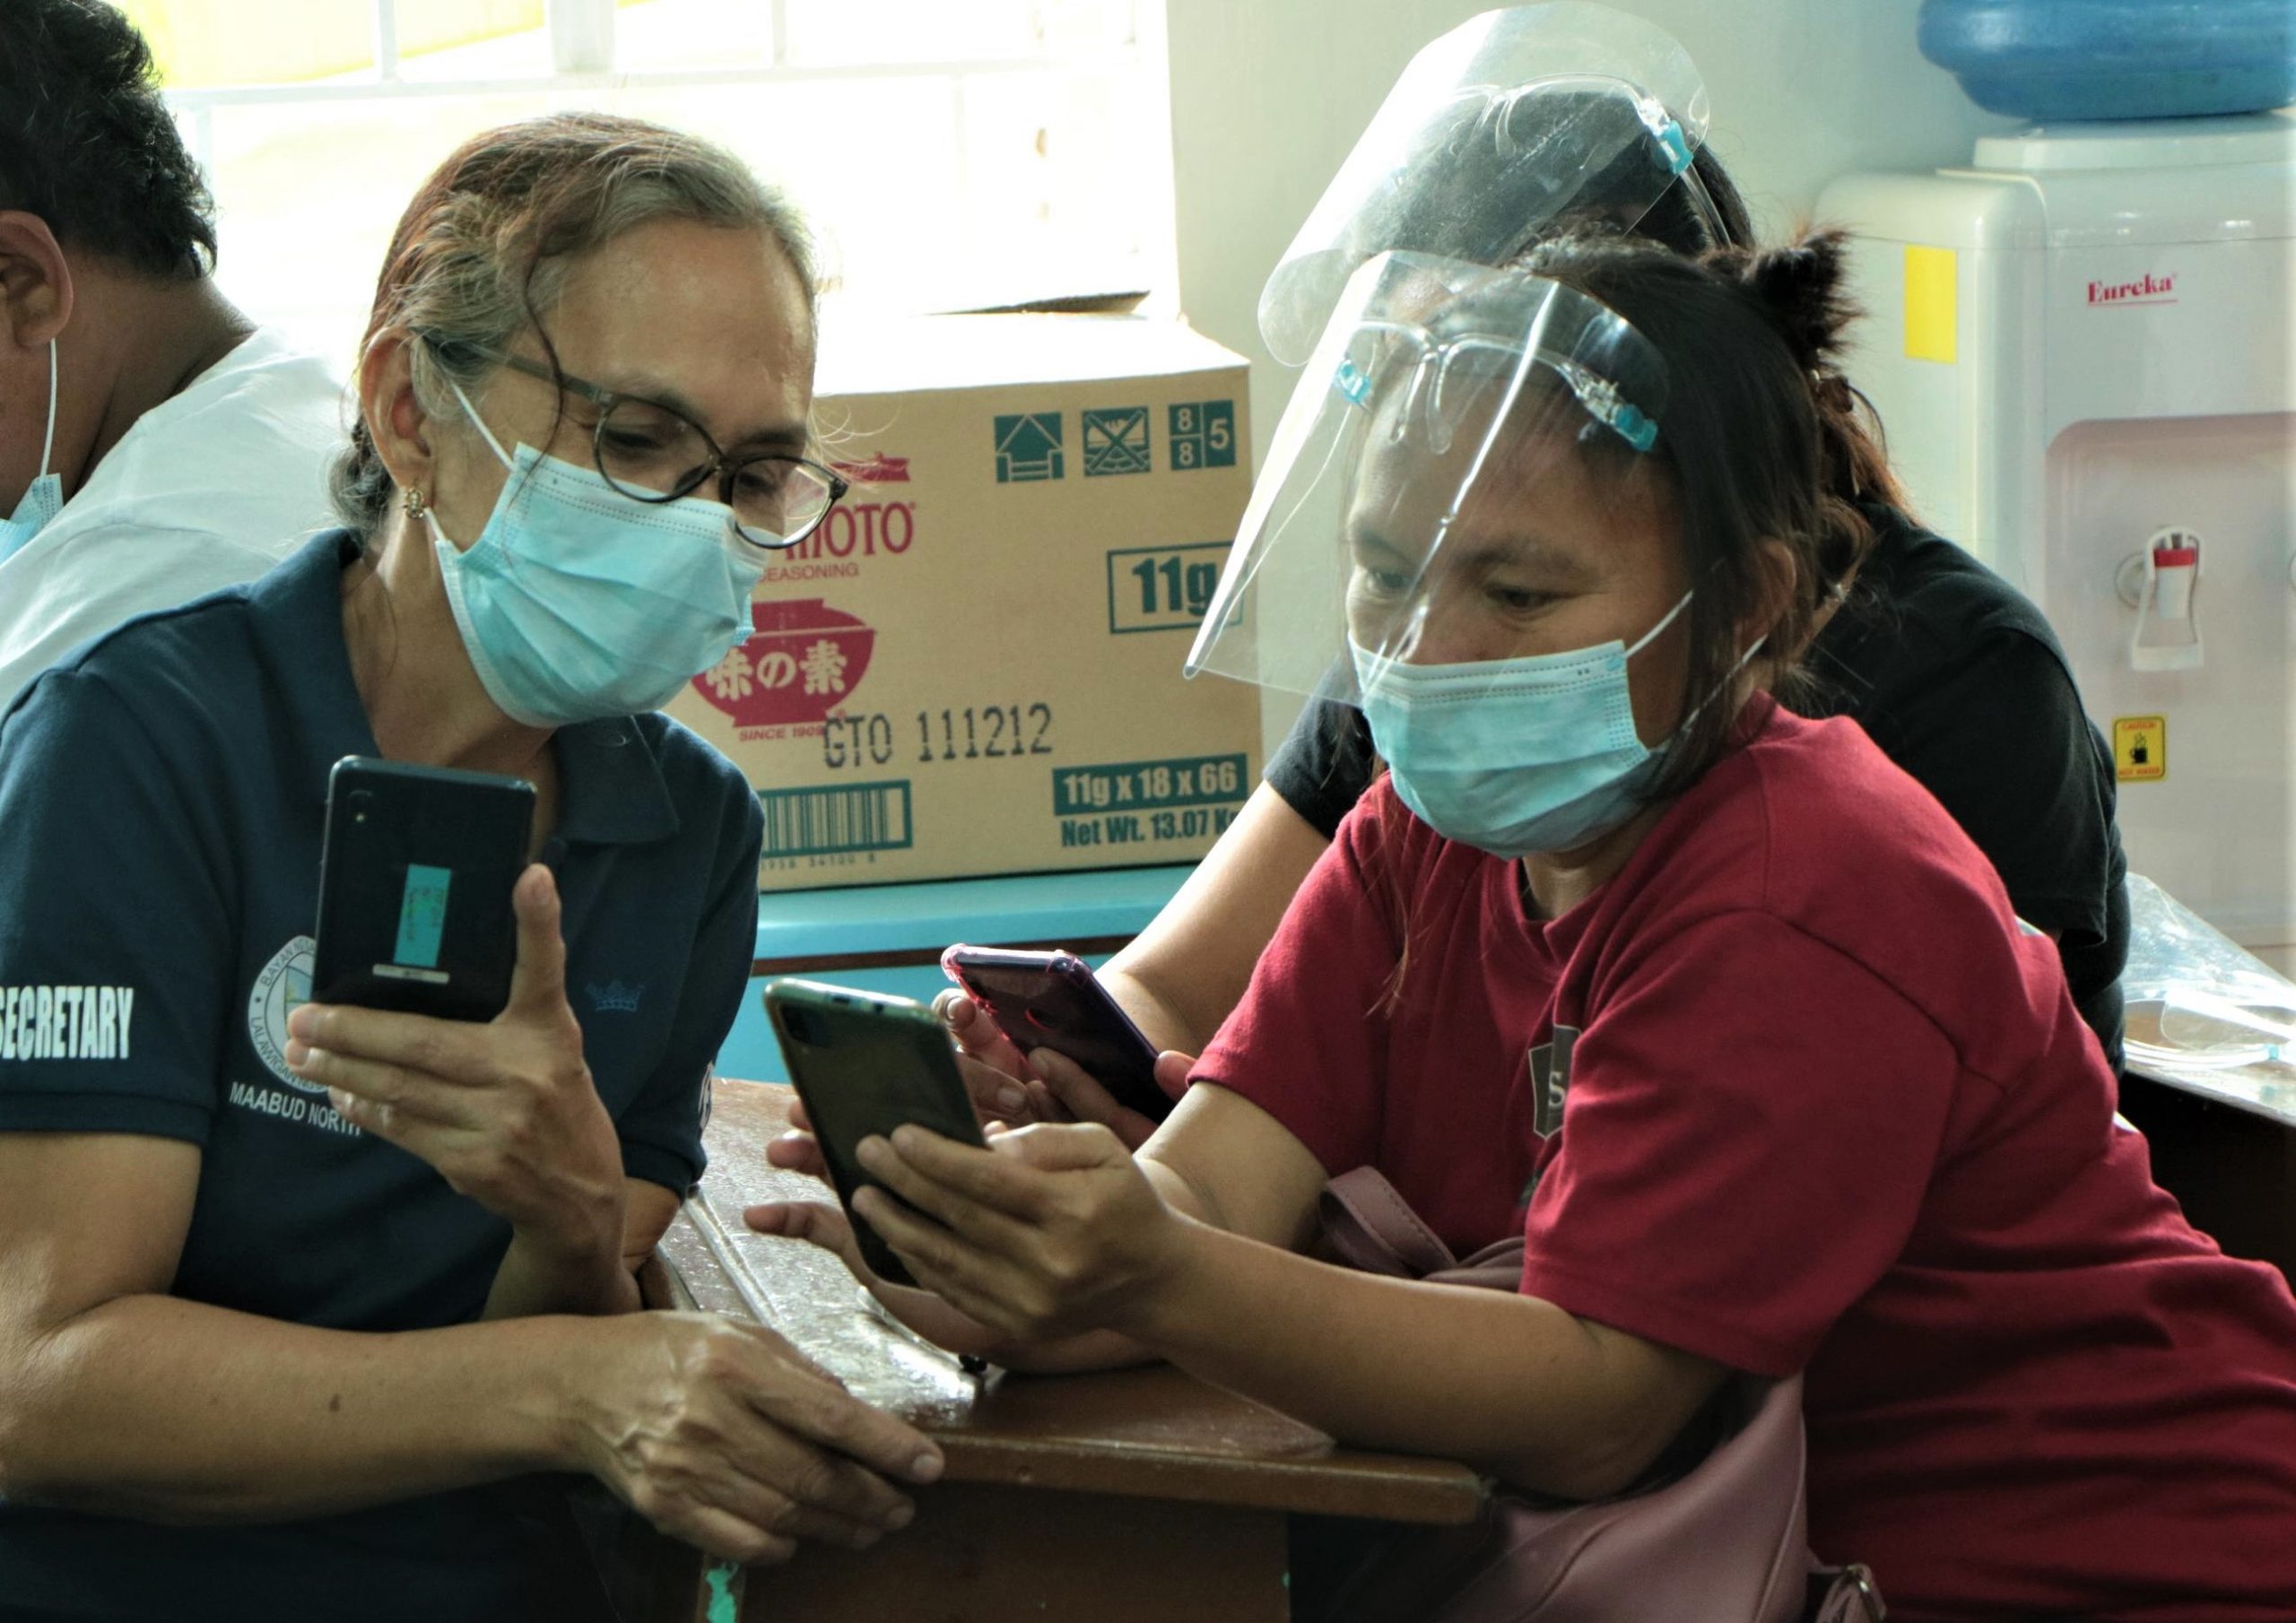 PLDT, Smart extend aid in Taal volcano eruption, pandemic